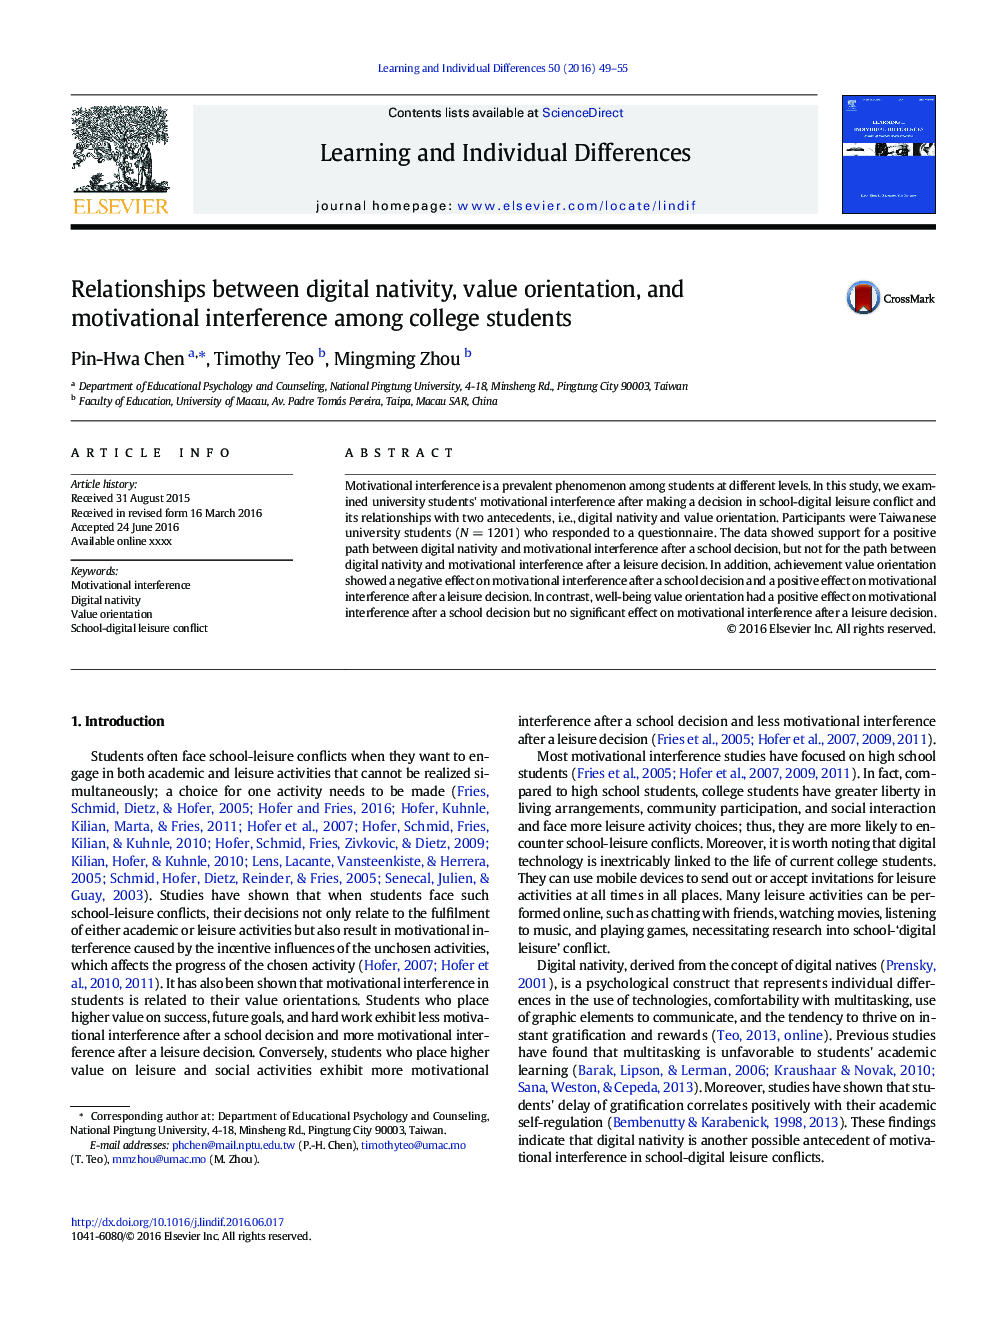 Relationships between digital nativity, value orientation, and motivational interference among college students